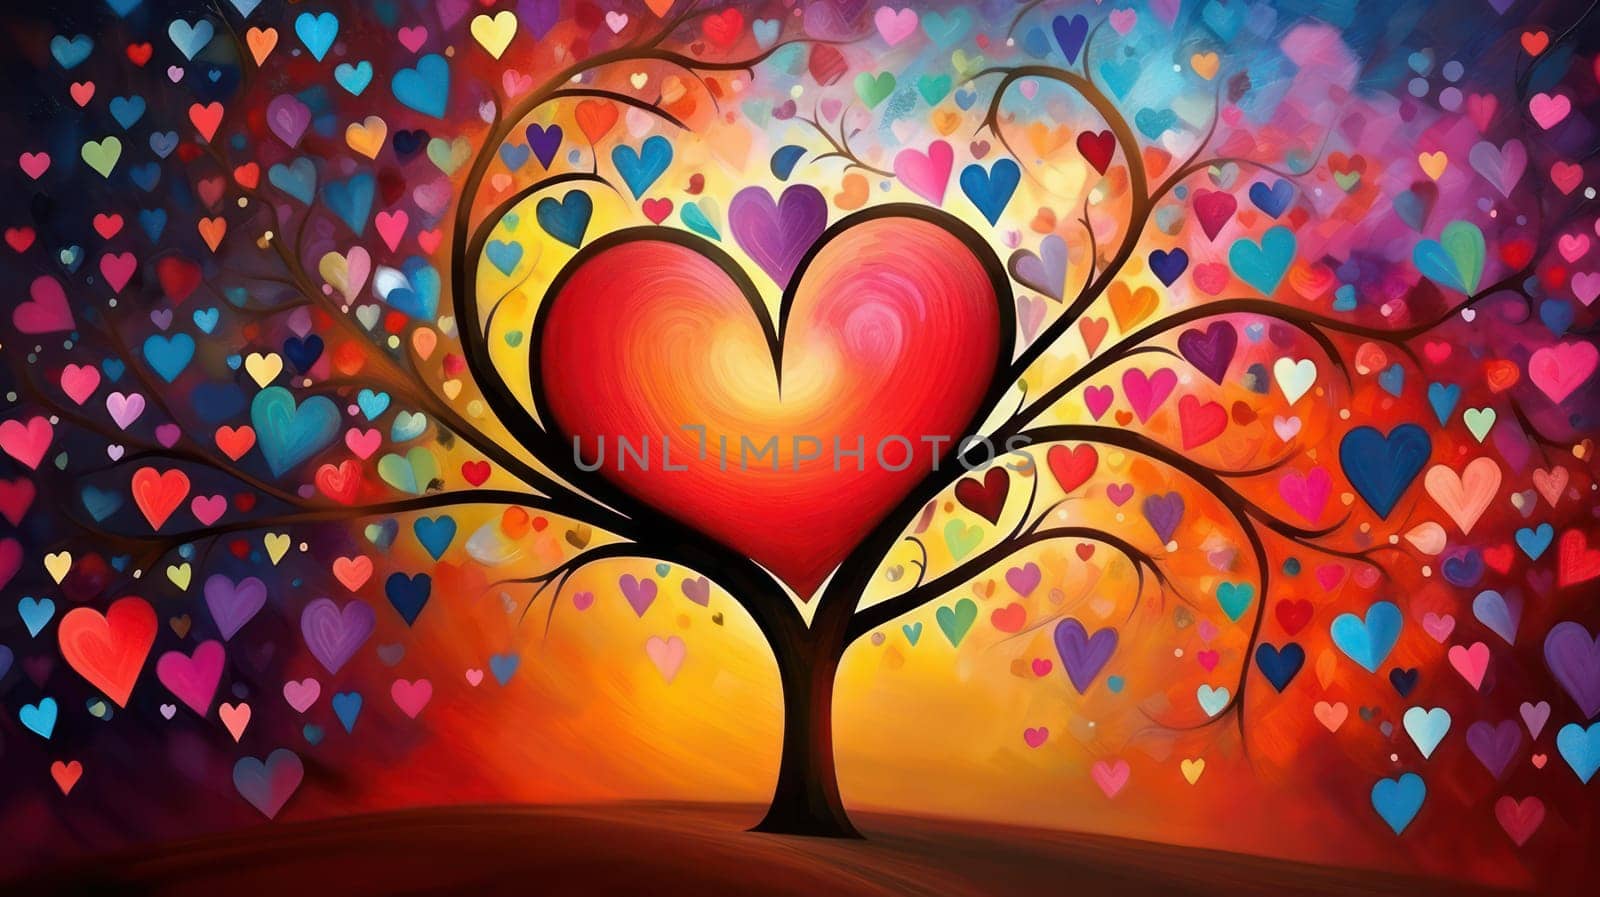 Romantic Love: A Whimsical Heart-shaped Tree of Emotions and Beauty, Illustration on a Red Abstract Background by Vichizh